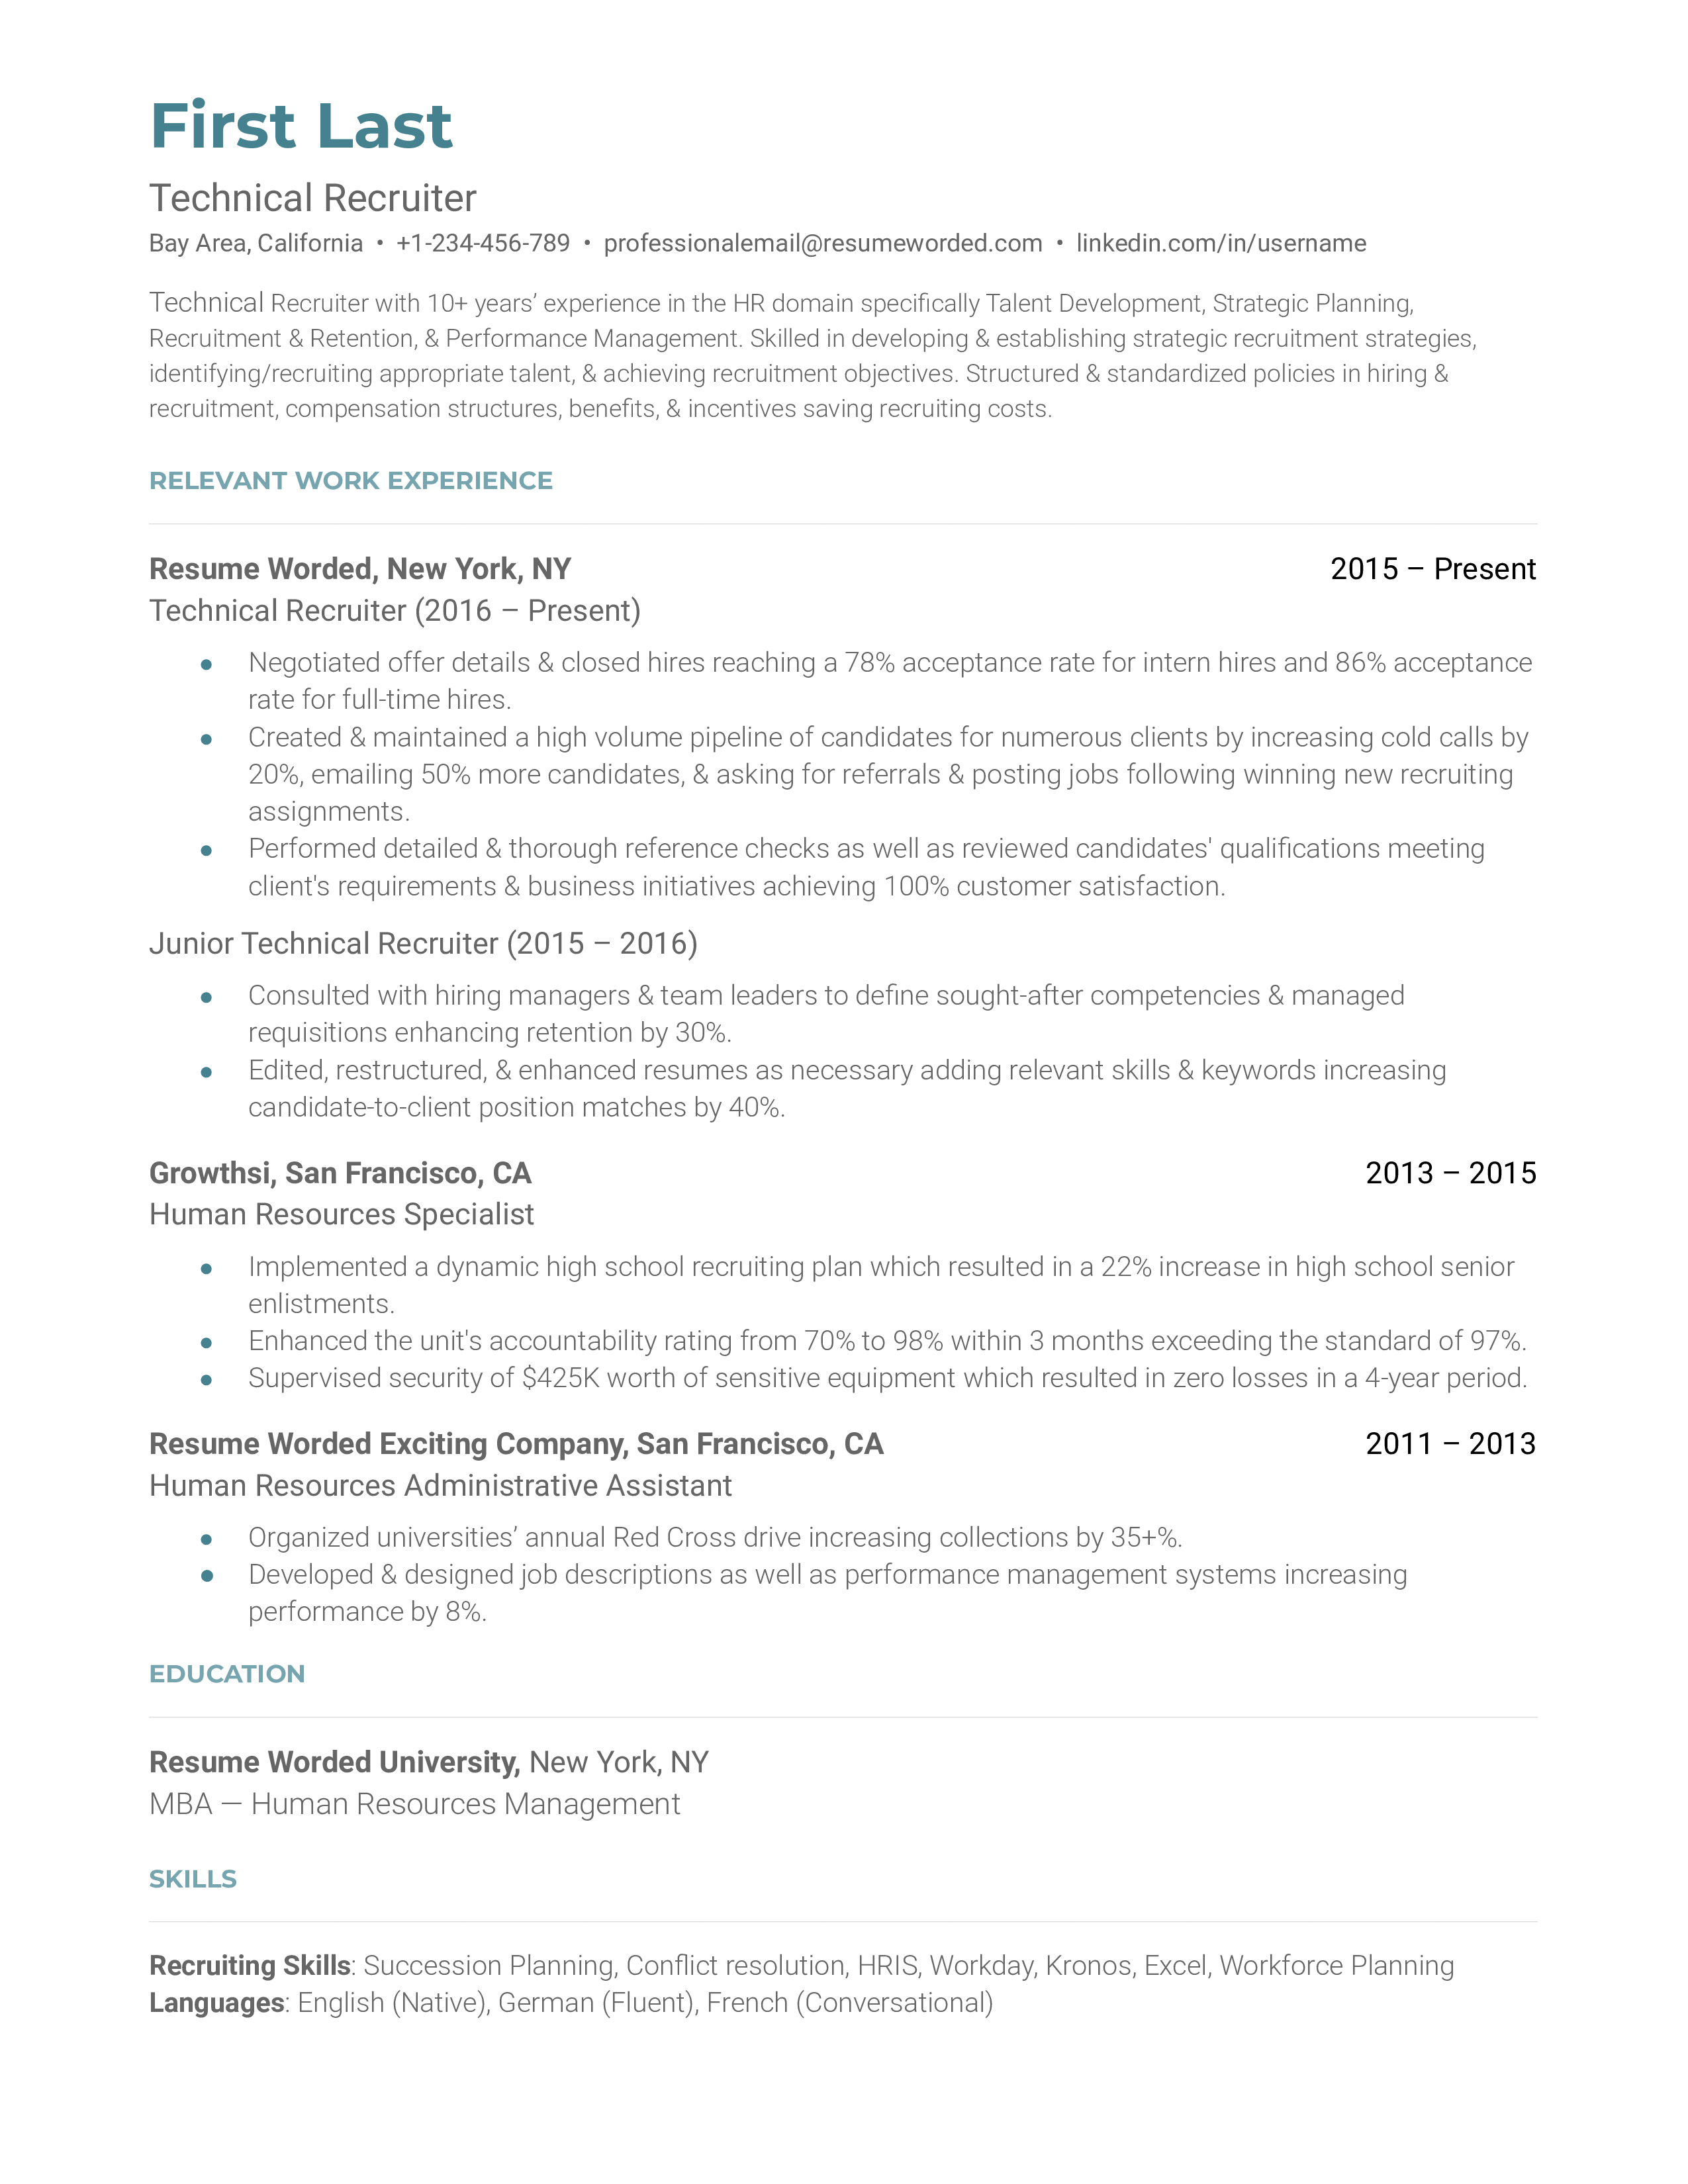 Technical Recruiter CV showing tech knowledge and relationship-building skills.